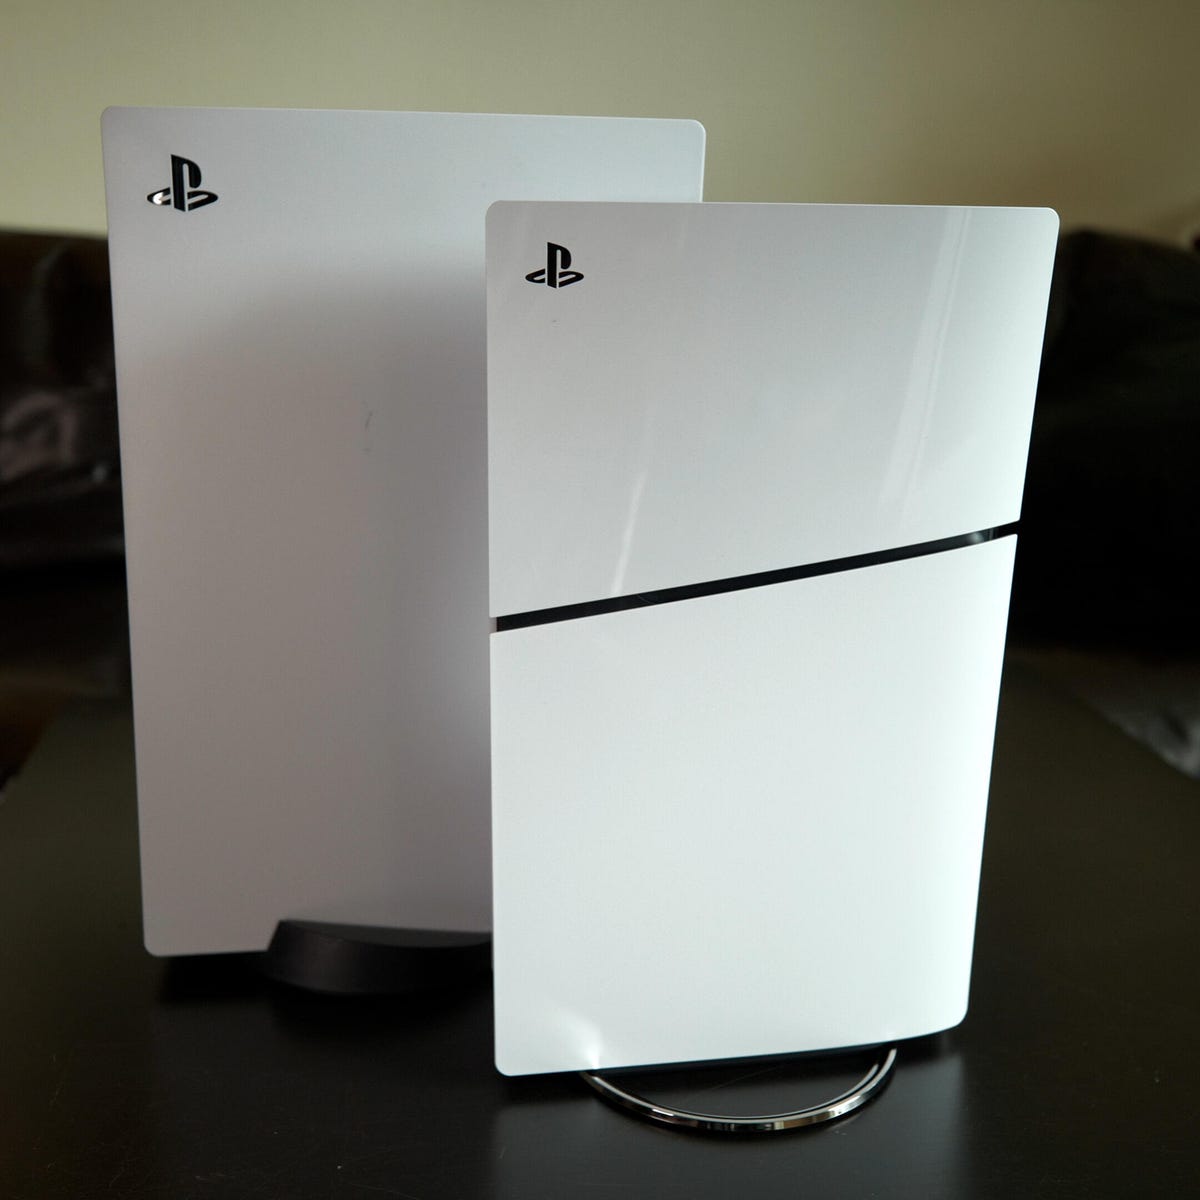 Slim PlayStation 5: Hands-On With Sony's New, More Compact Console - CNET